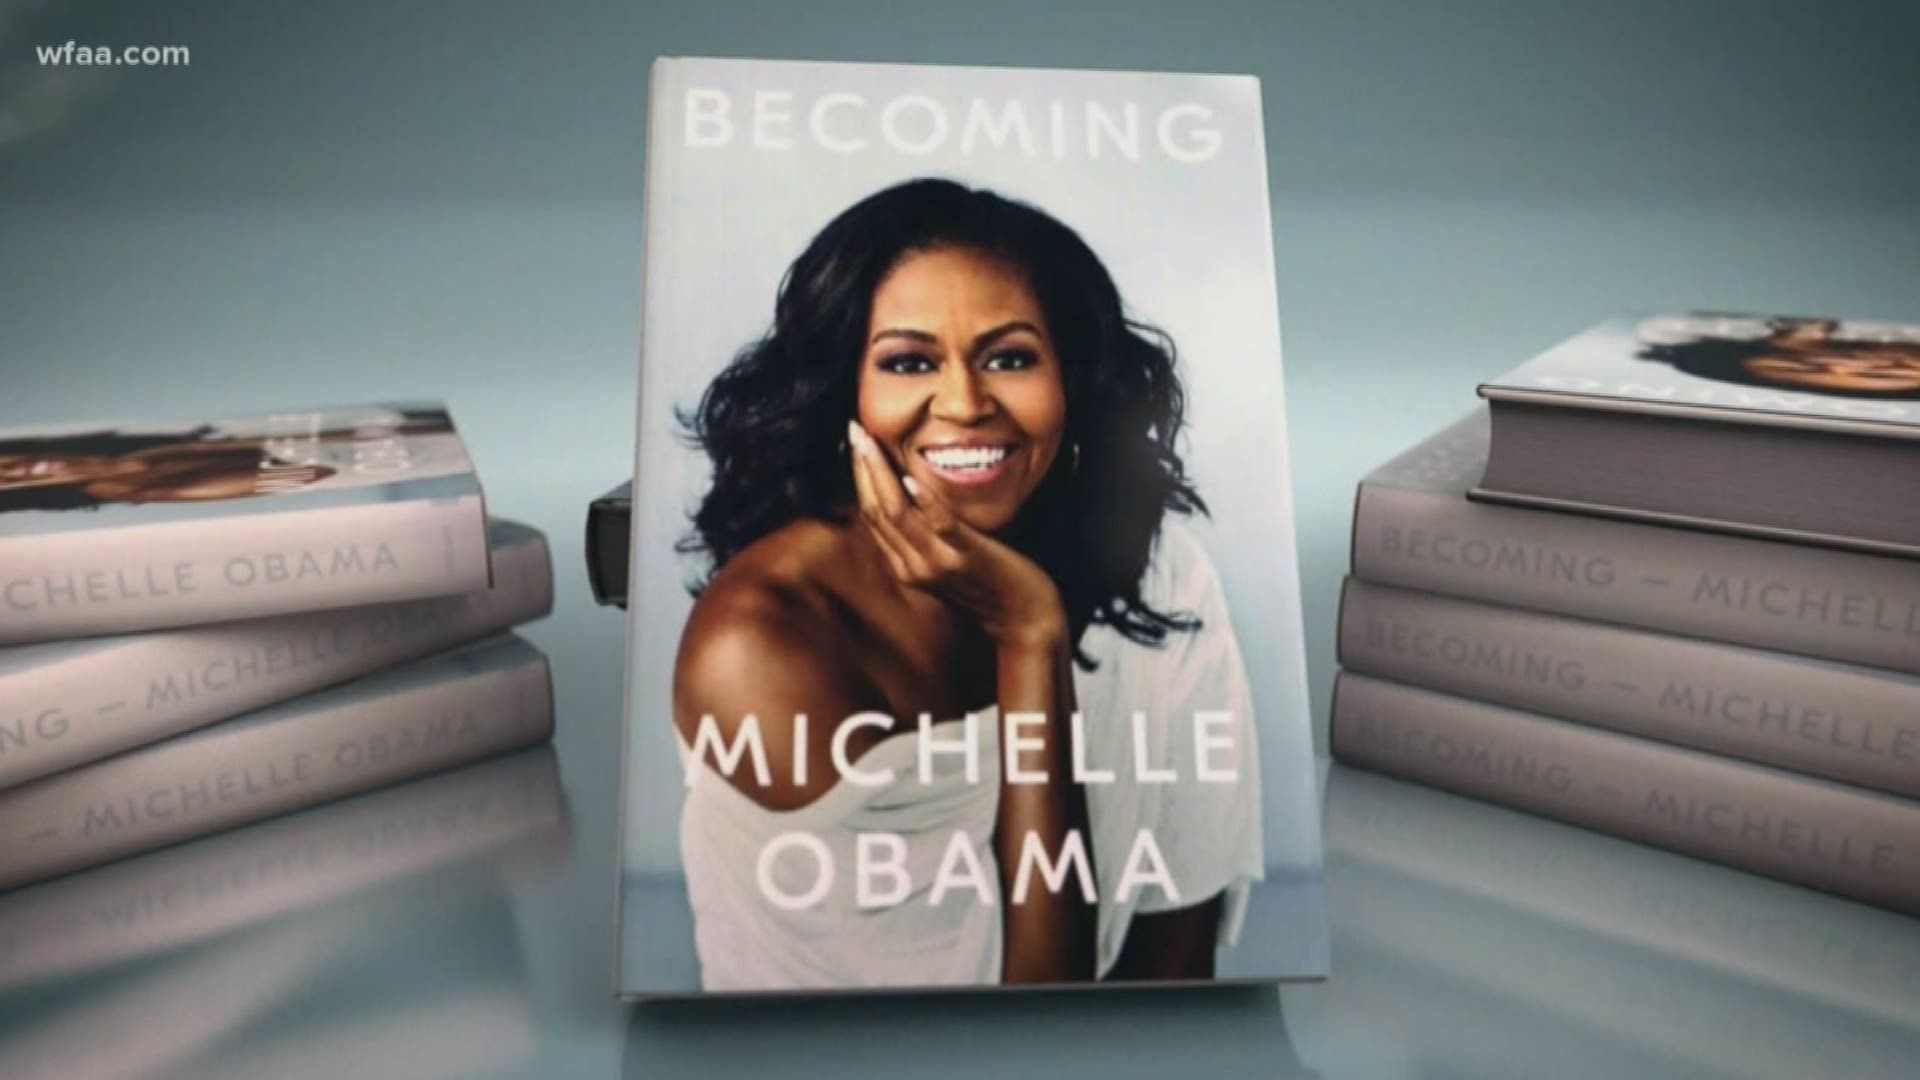 Some VIP attendees of Michelle Obama's book tour still wait for